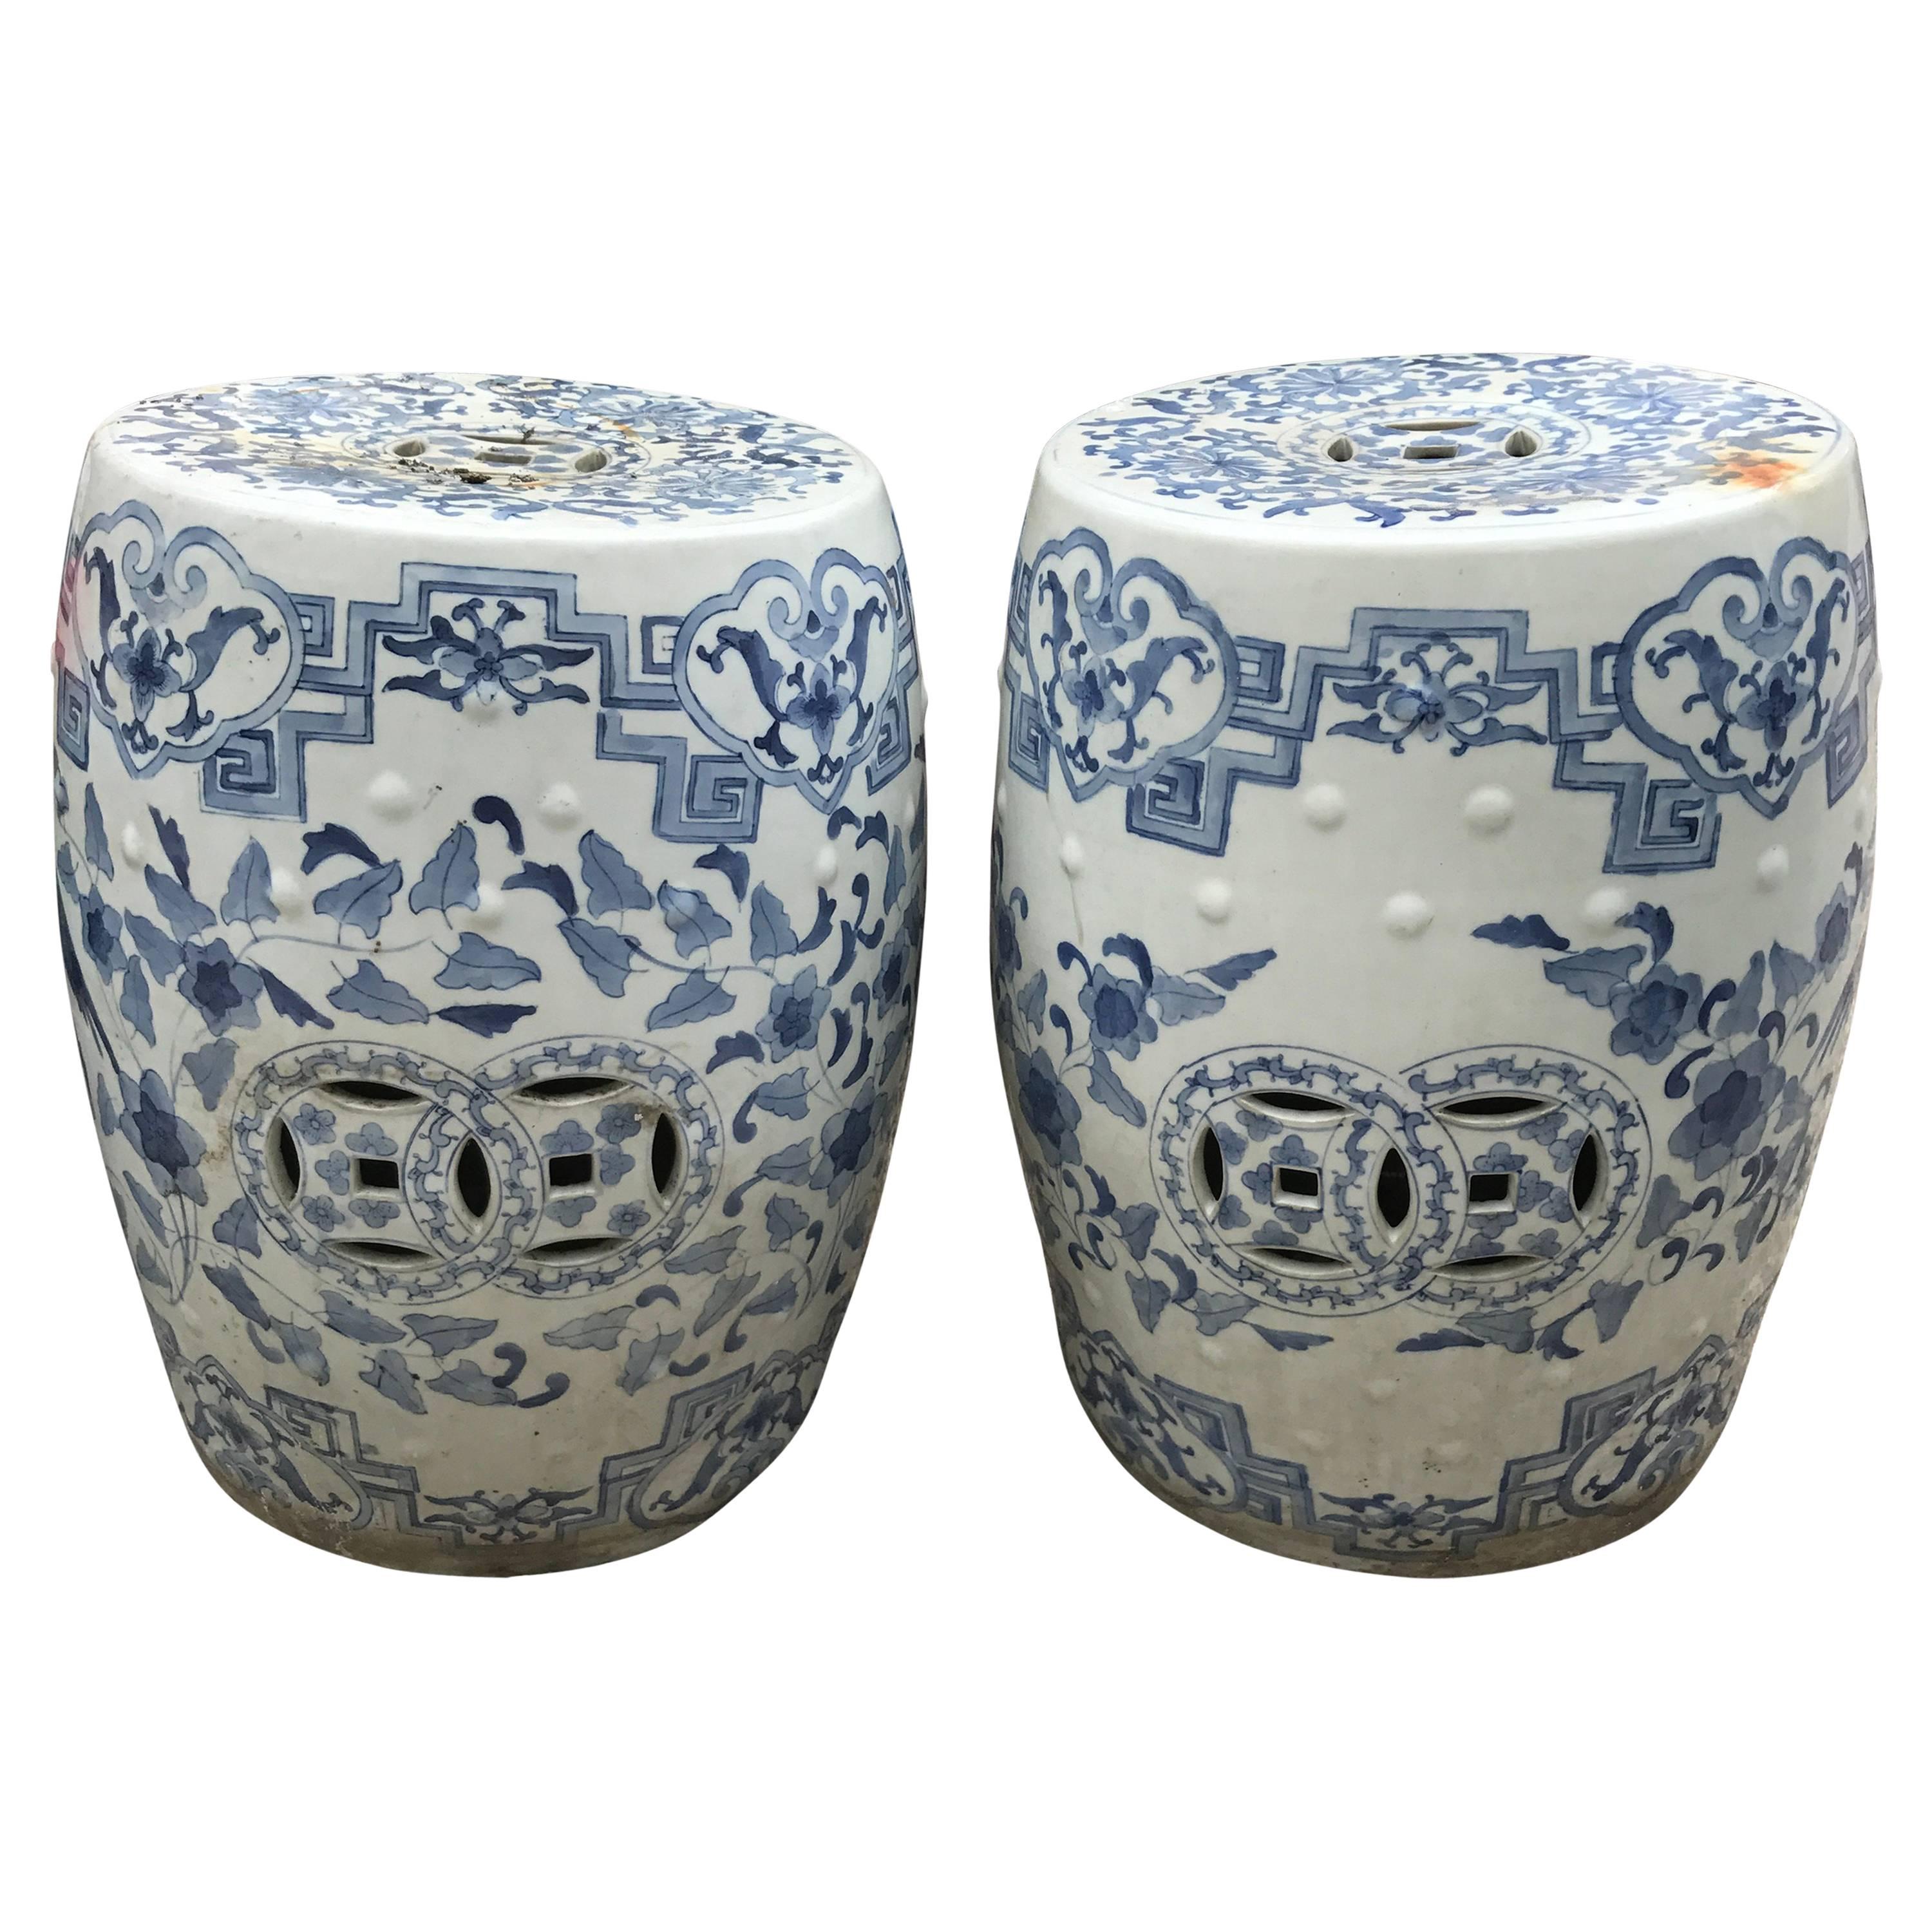 Chinese Antique Pair of Hand-Painted Blue and White Garden Stools Seats